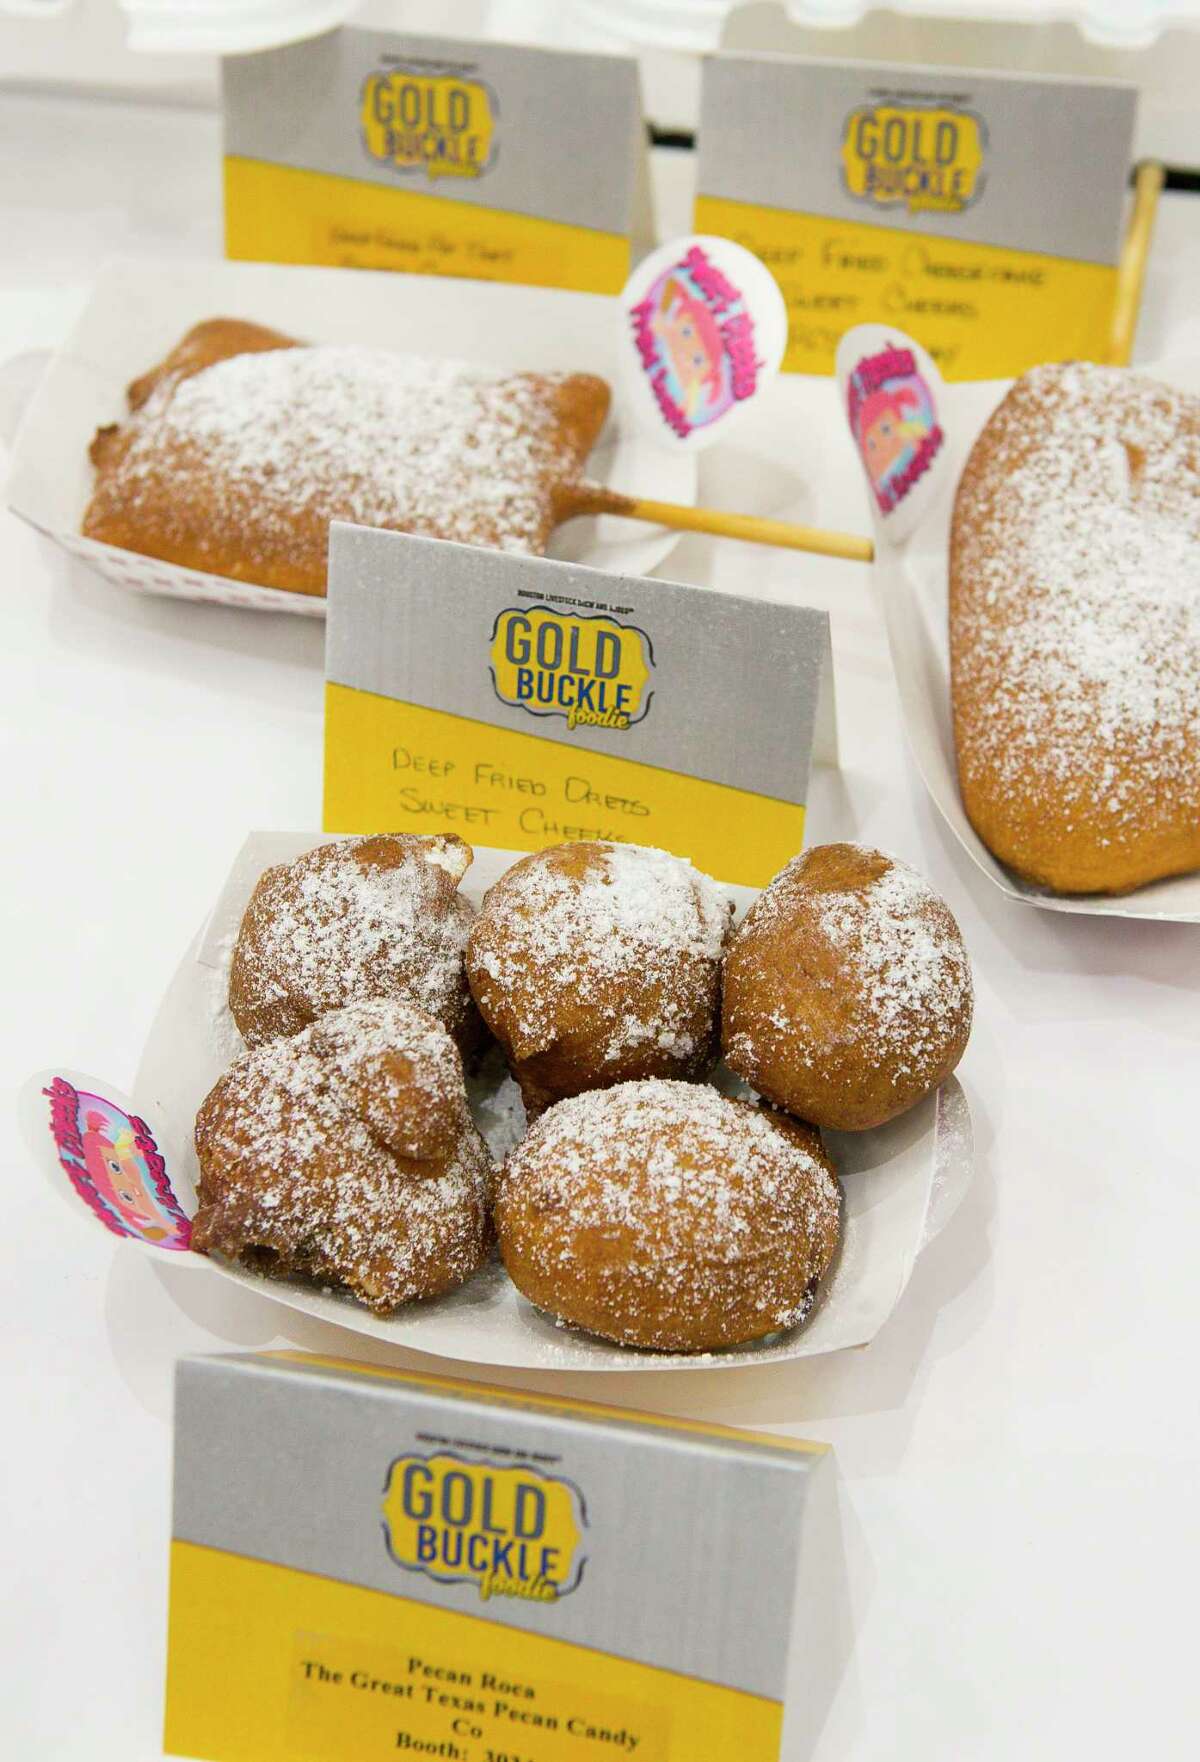 Deep Fried Oreos from Sweet Cheeks RCS Carnival during the judging of the Gold Buckle Foodie Awards at the Houston Livestock Show and Rodeo in NRG Center, Thursday, Feb. 28, 2019. The annual contest pits fair foods available at the carnival against each other in several categories for local judges.